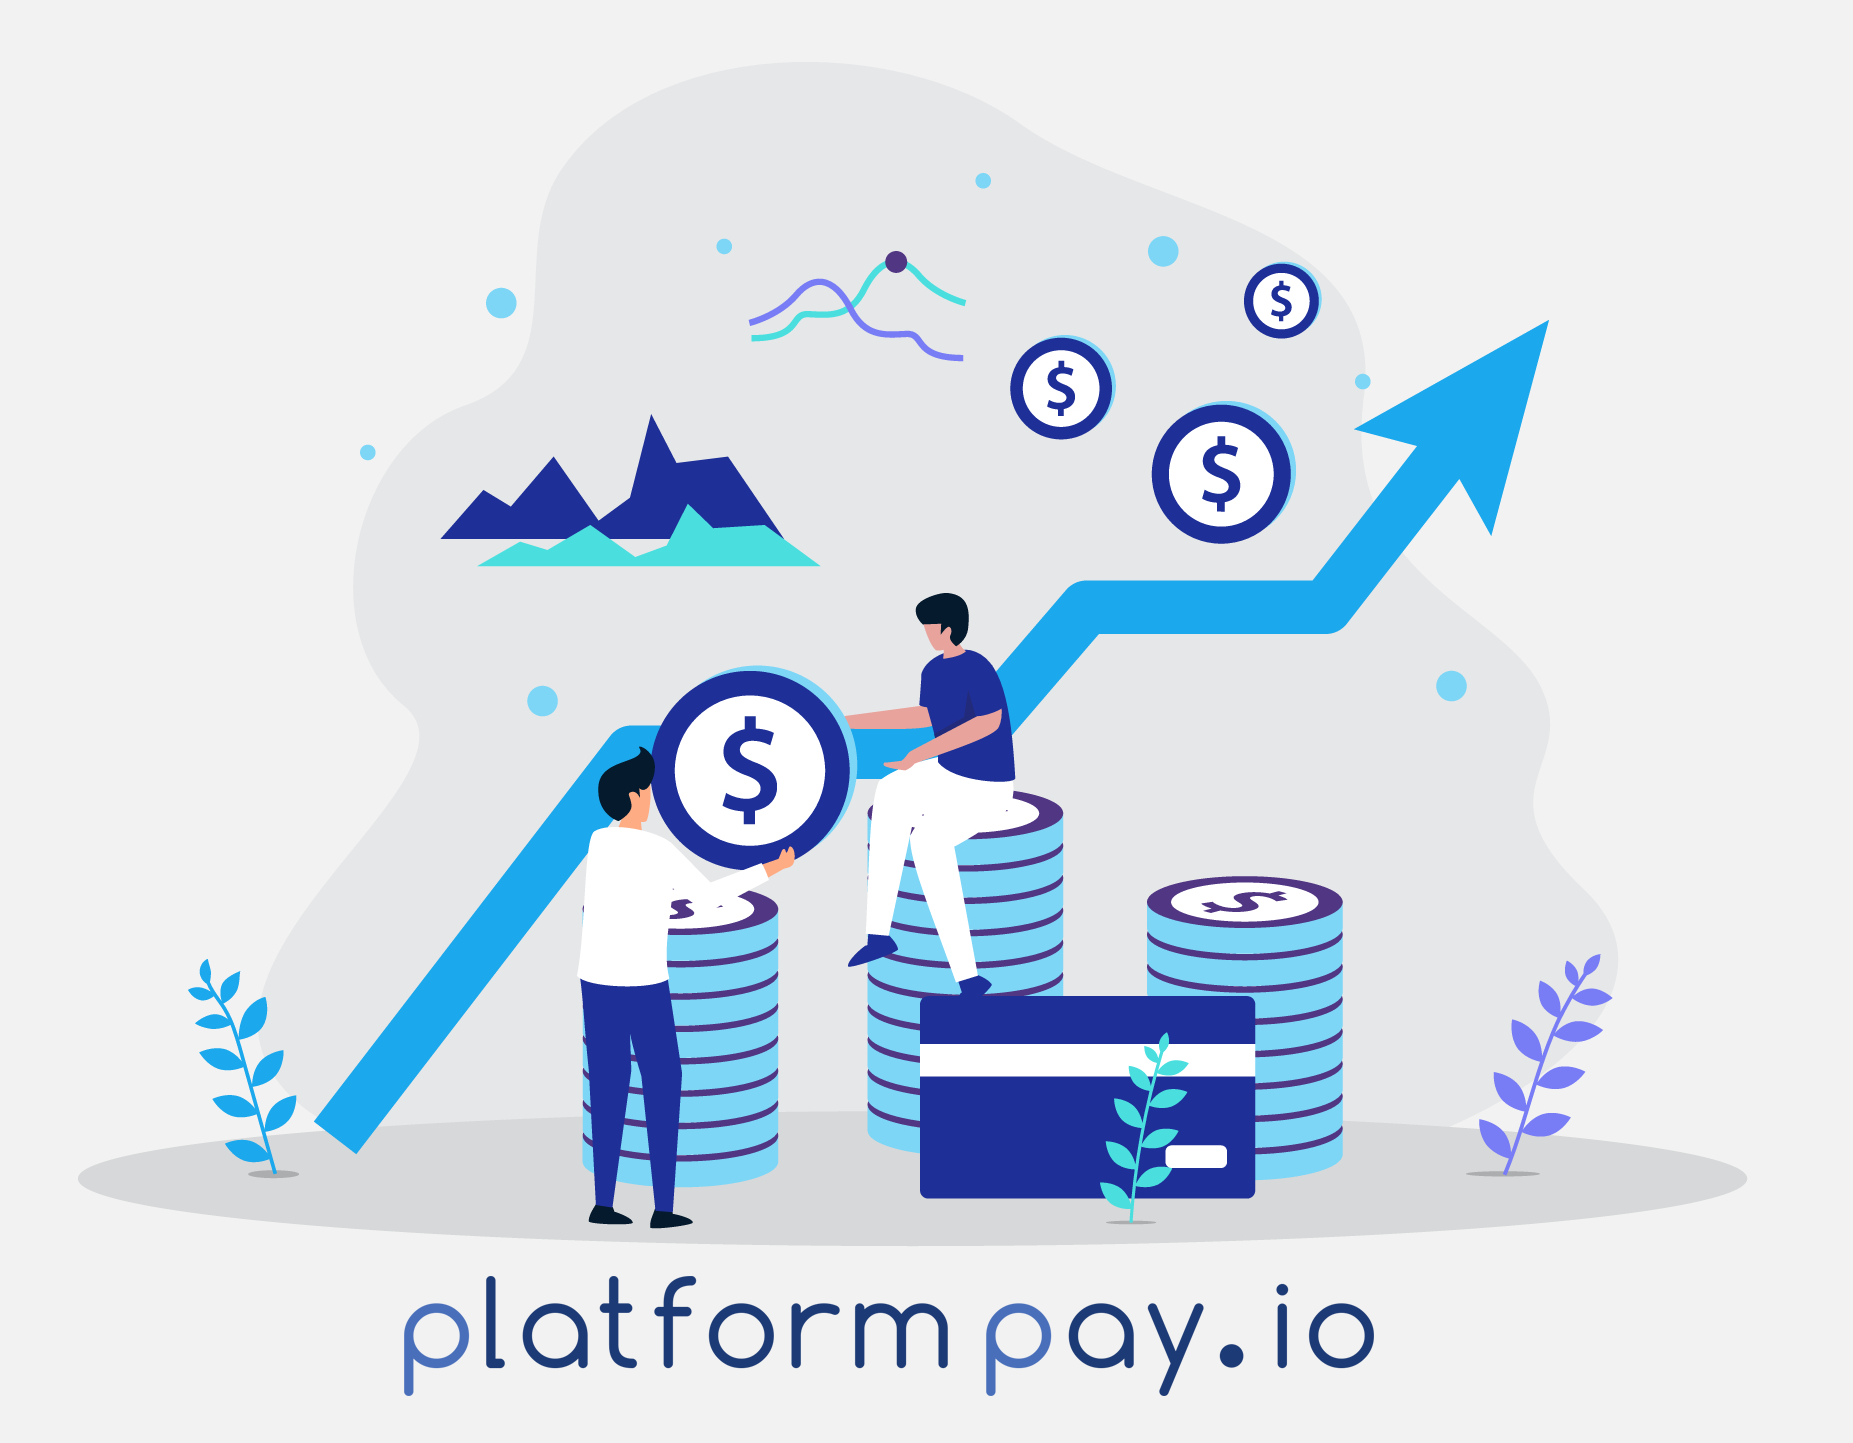 PlatformPay.io, Tuesday, March 28, 2023, Press release picture